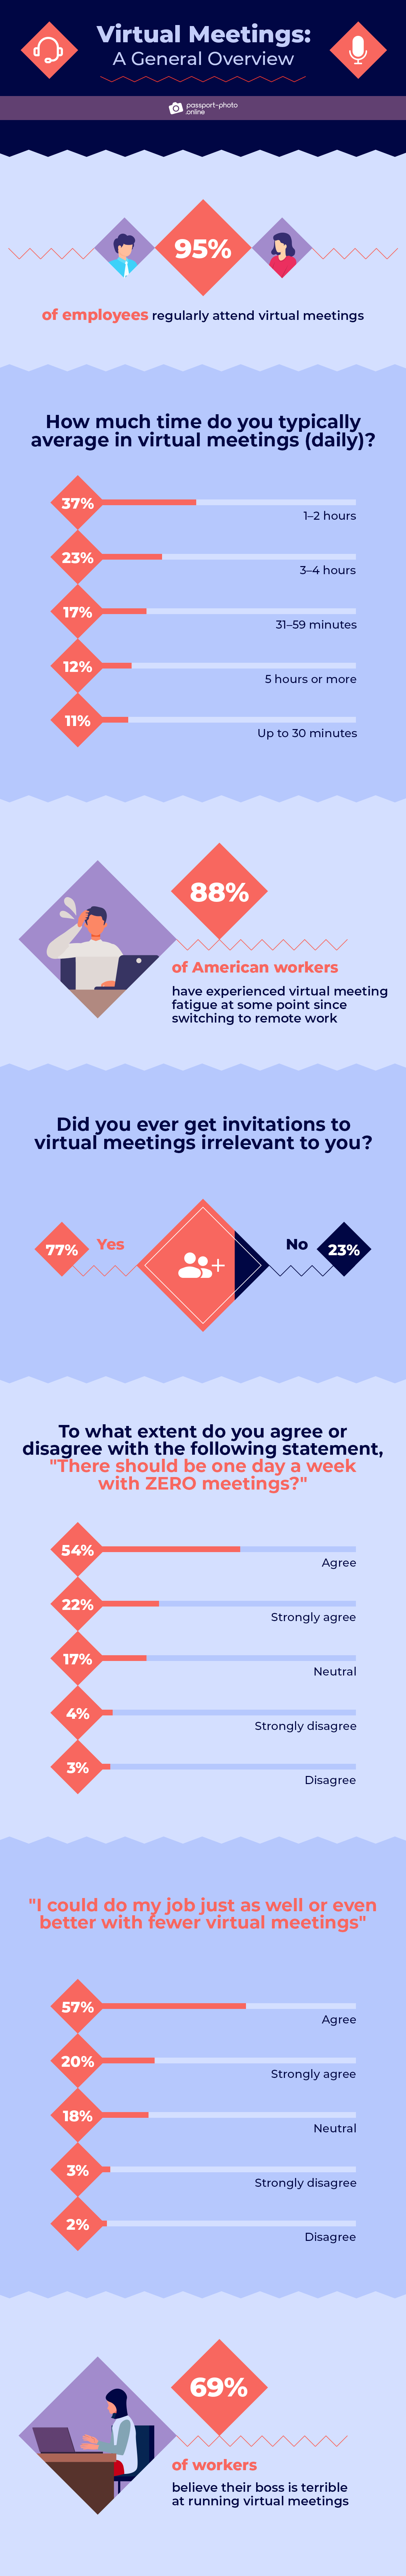 virtual meetings: a general overview